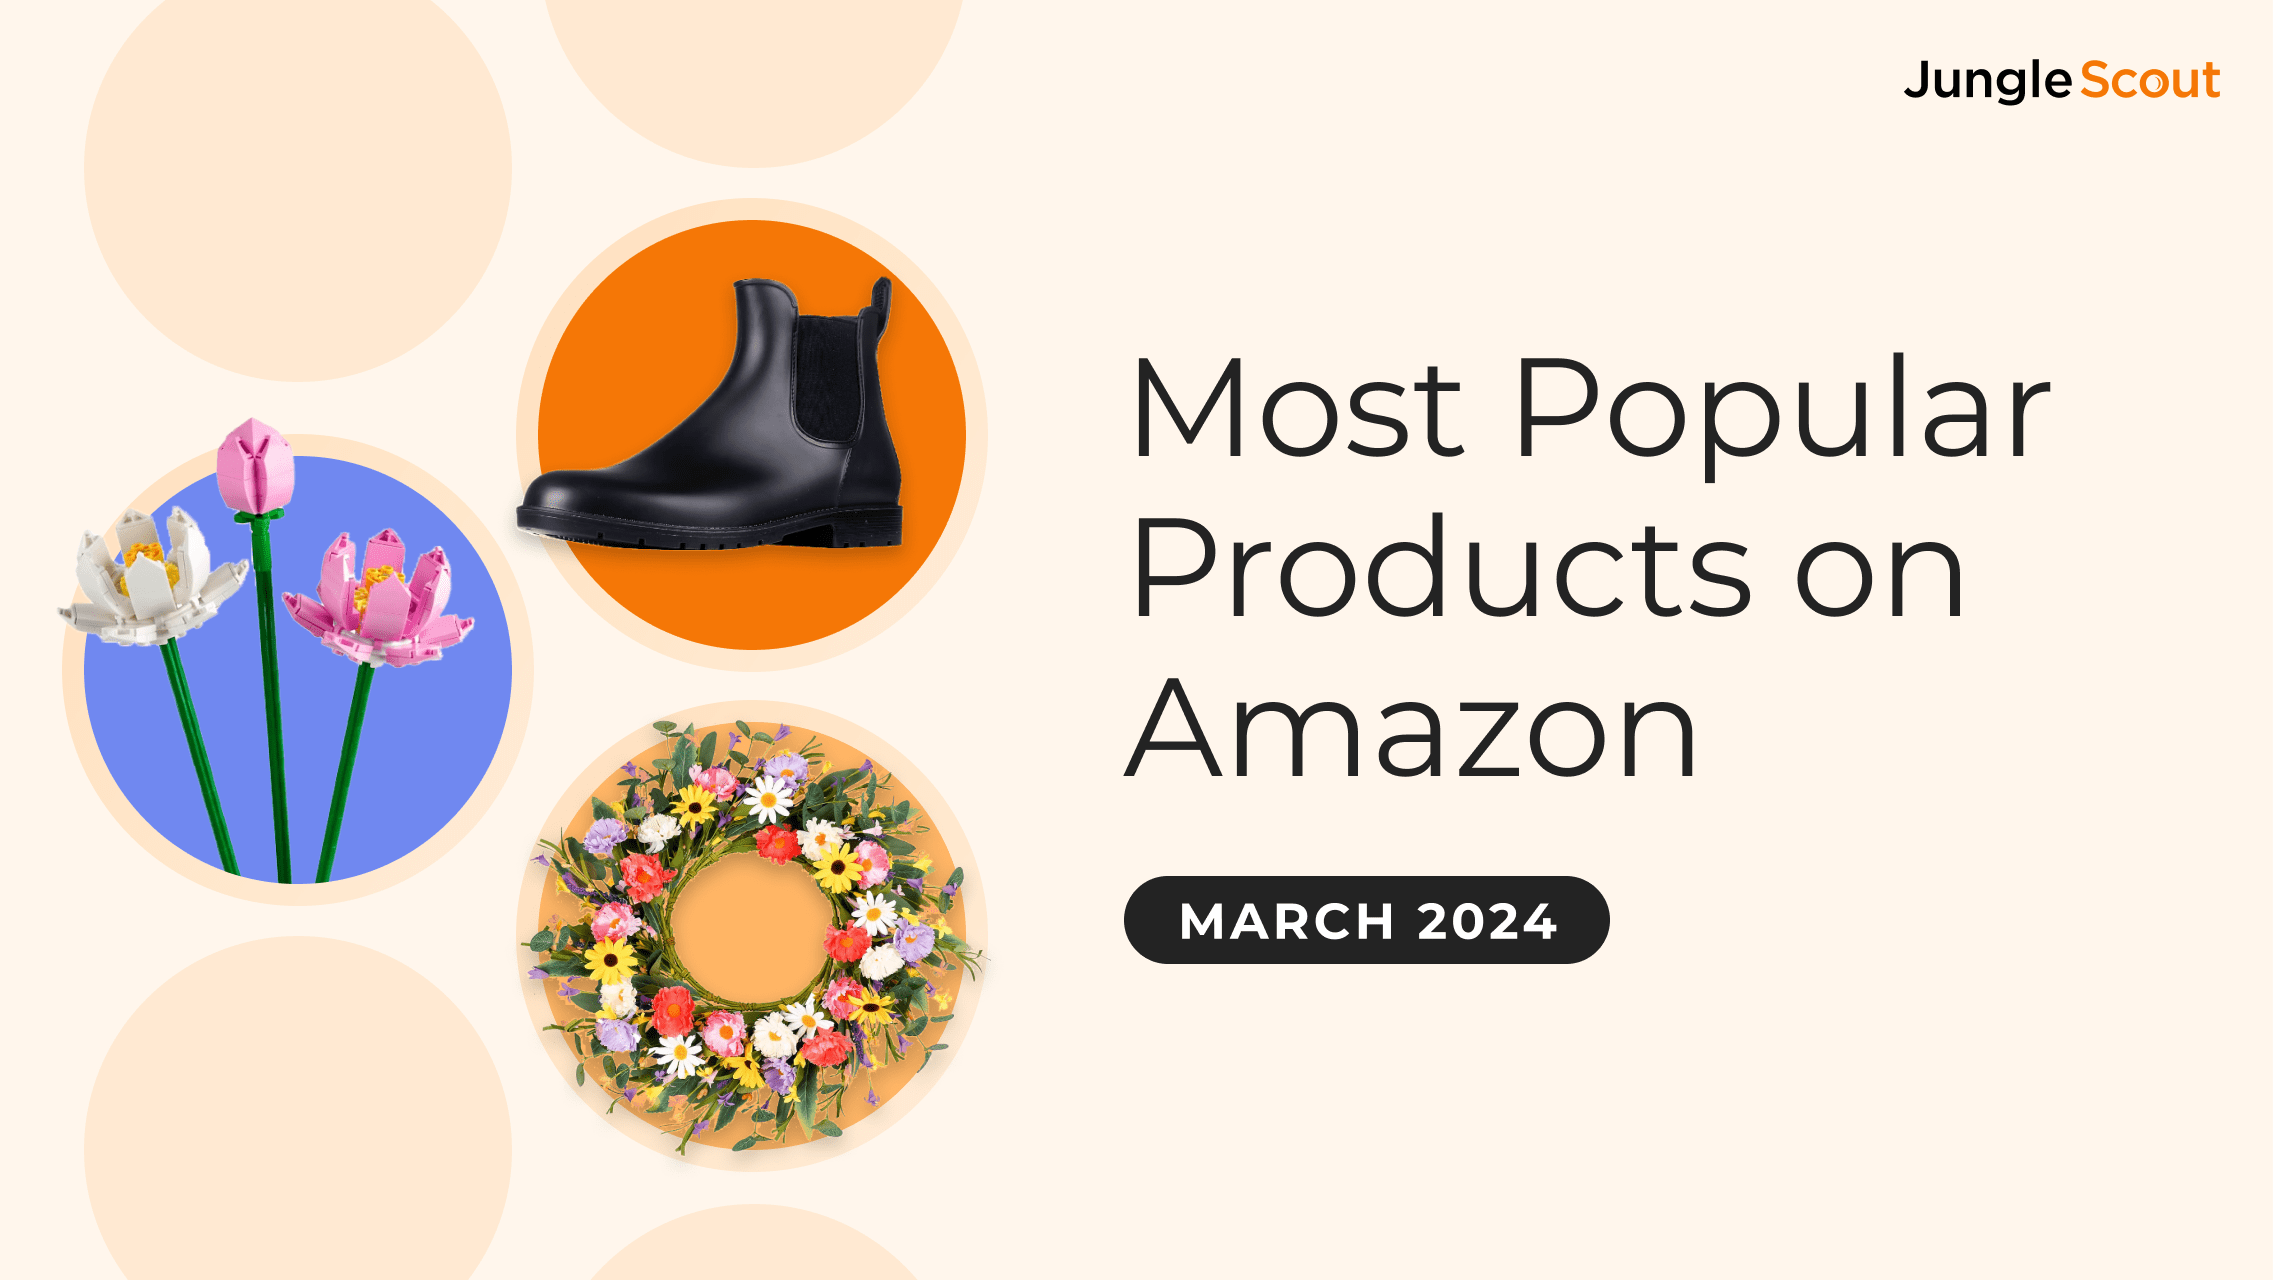 Amazon Best Sellers 11 BestSelling Products in March 2024